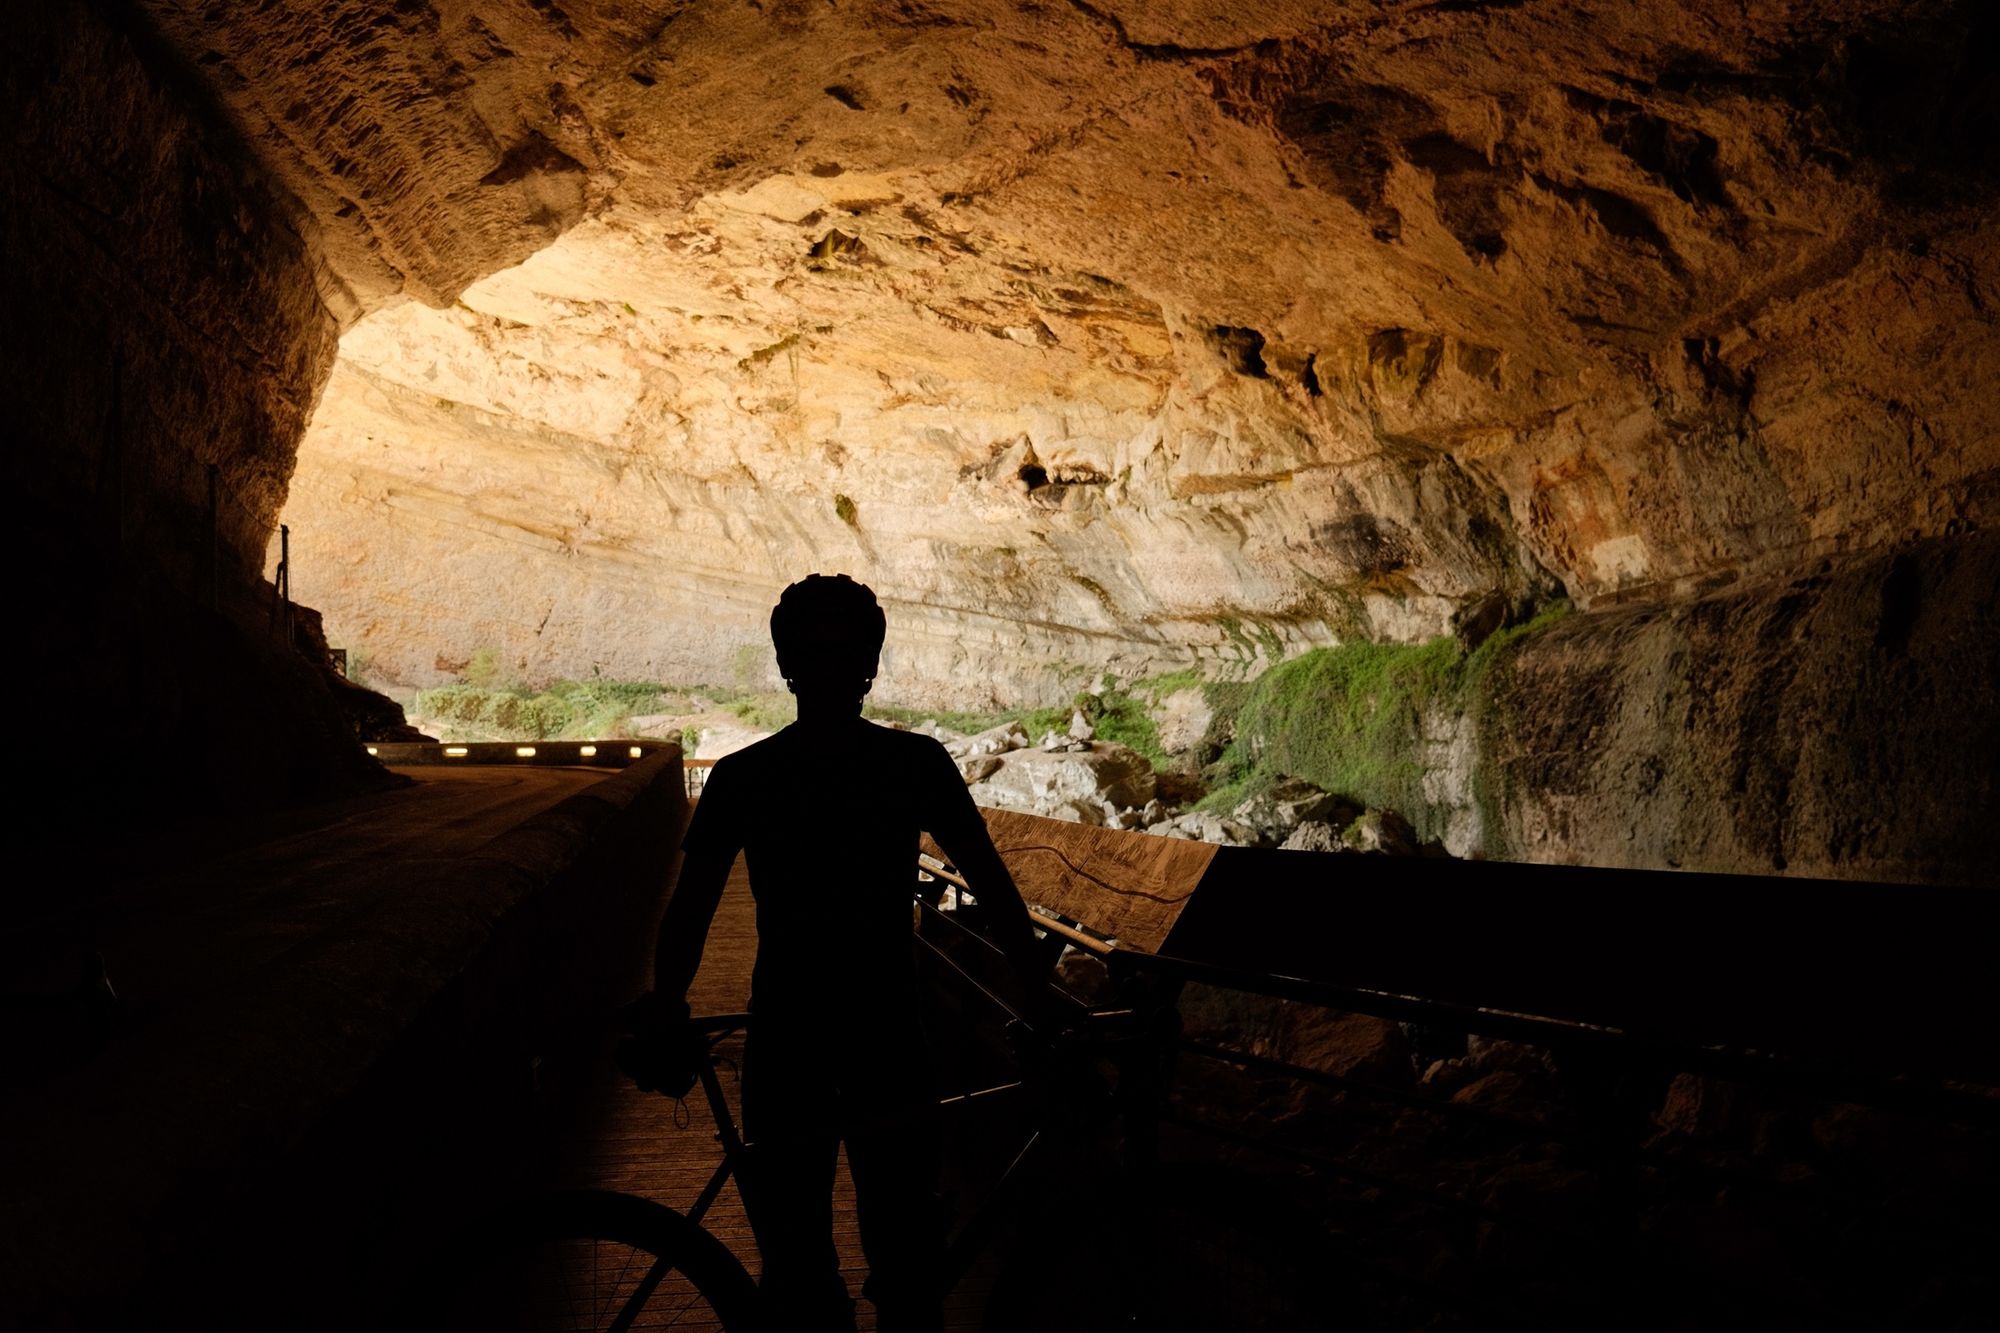 Riding the Grotte Loop